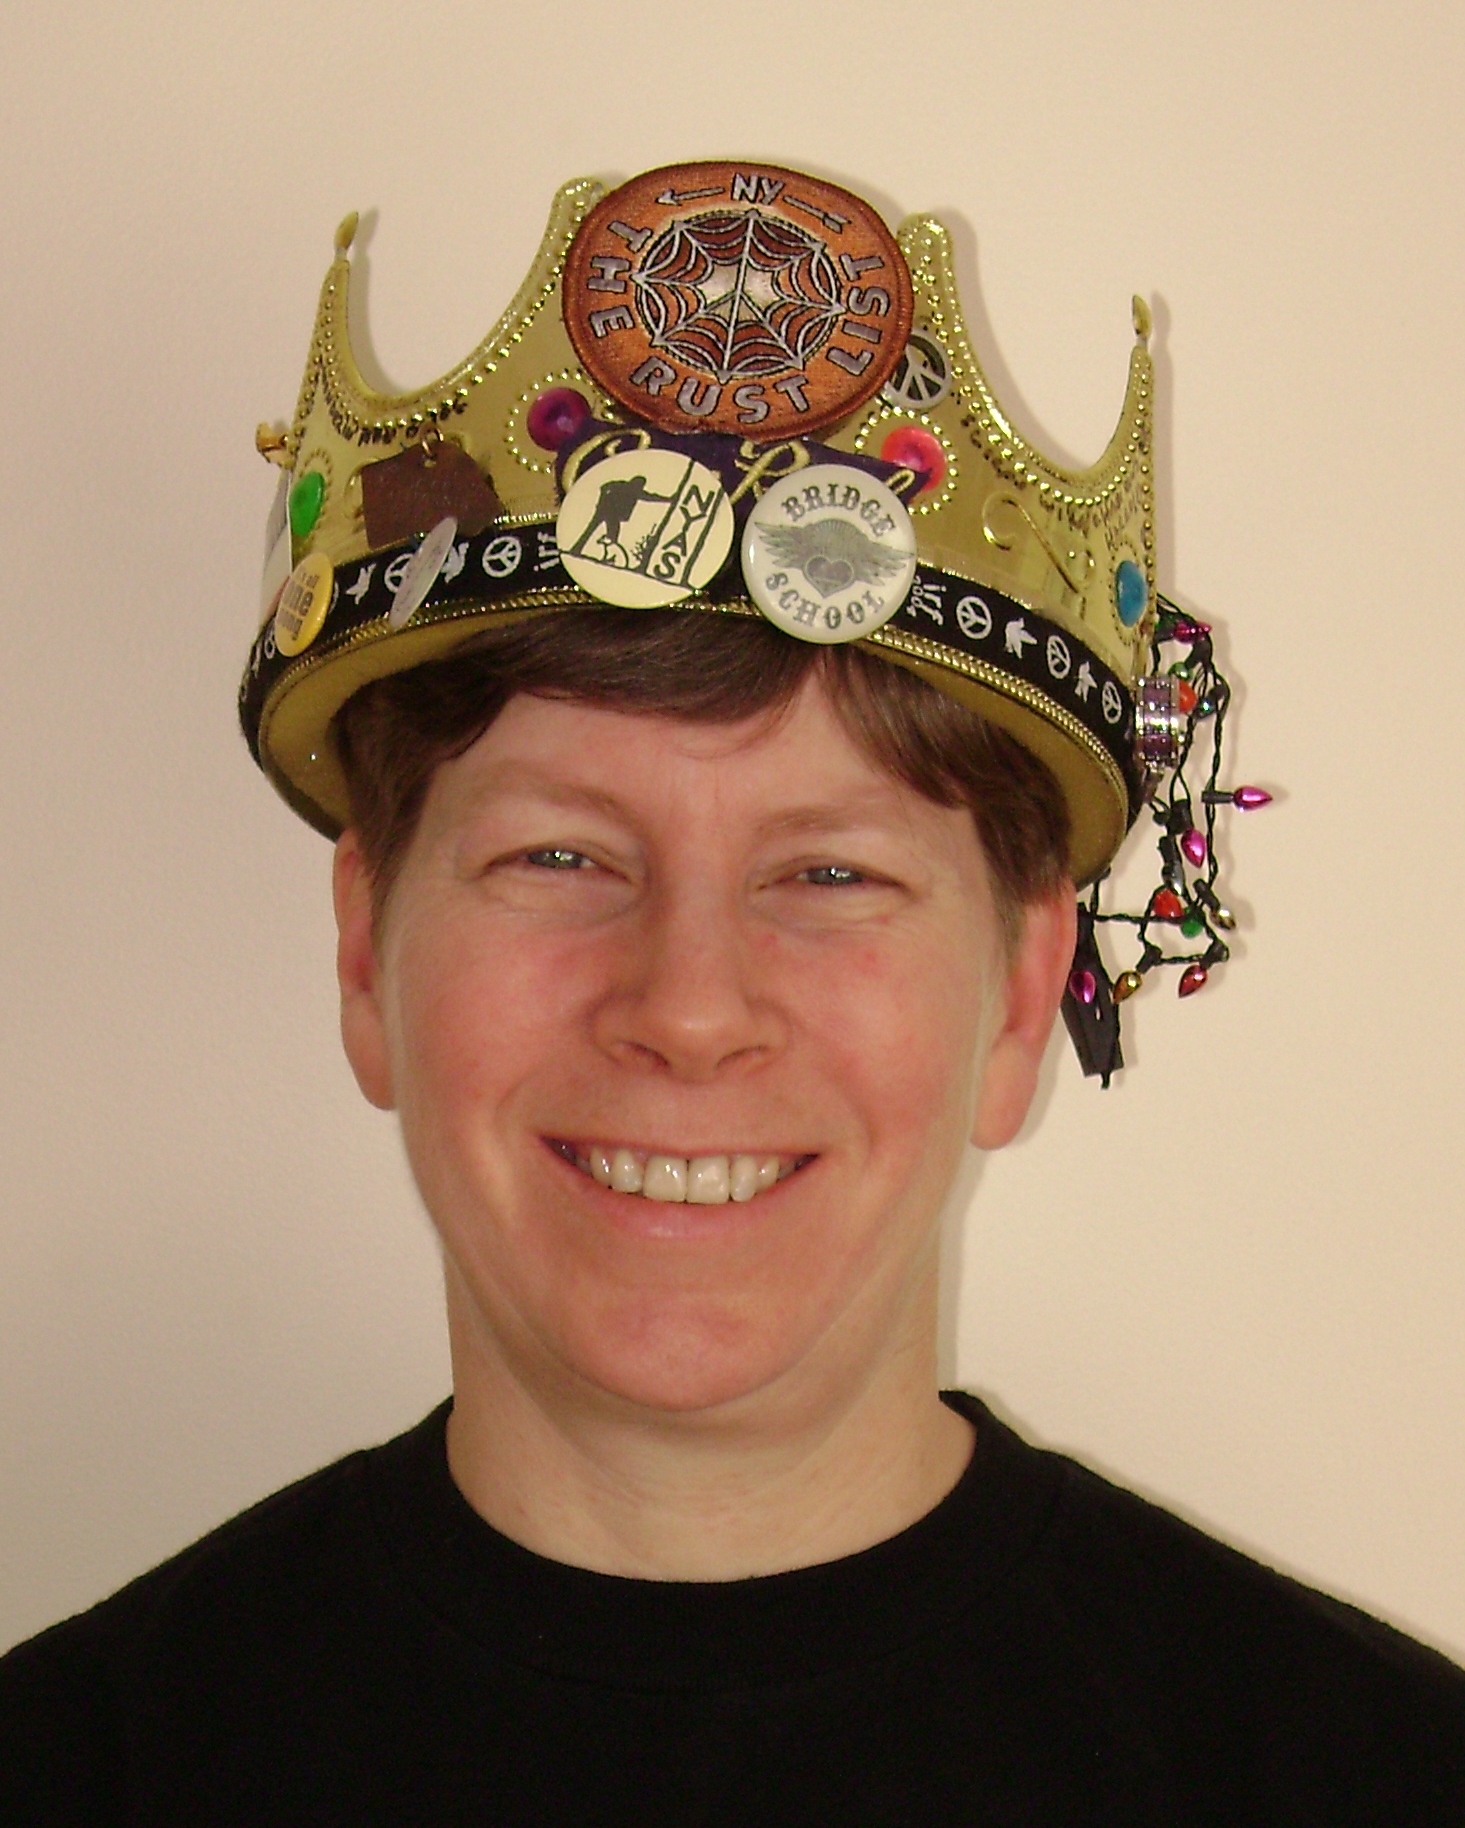 Photo of Trish wearing the ROTM crown